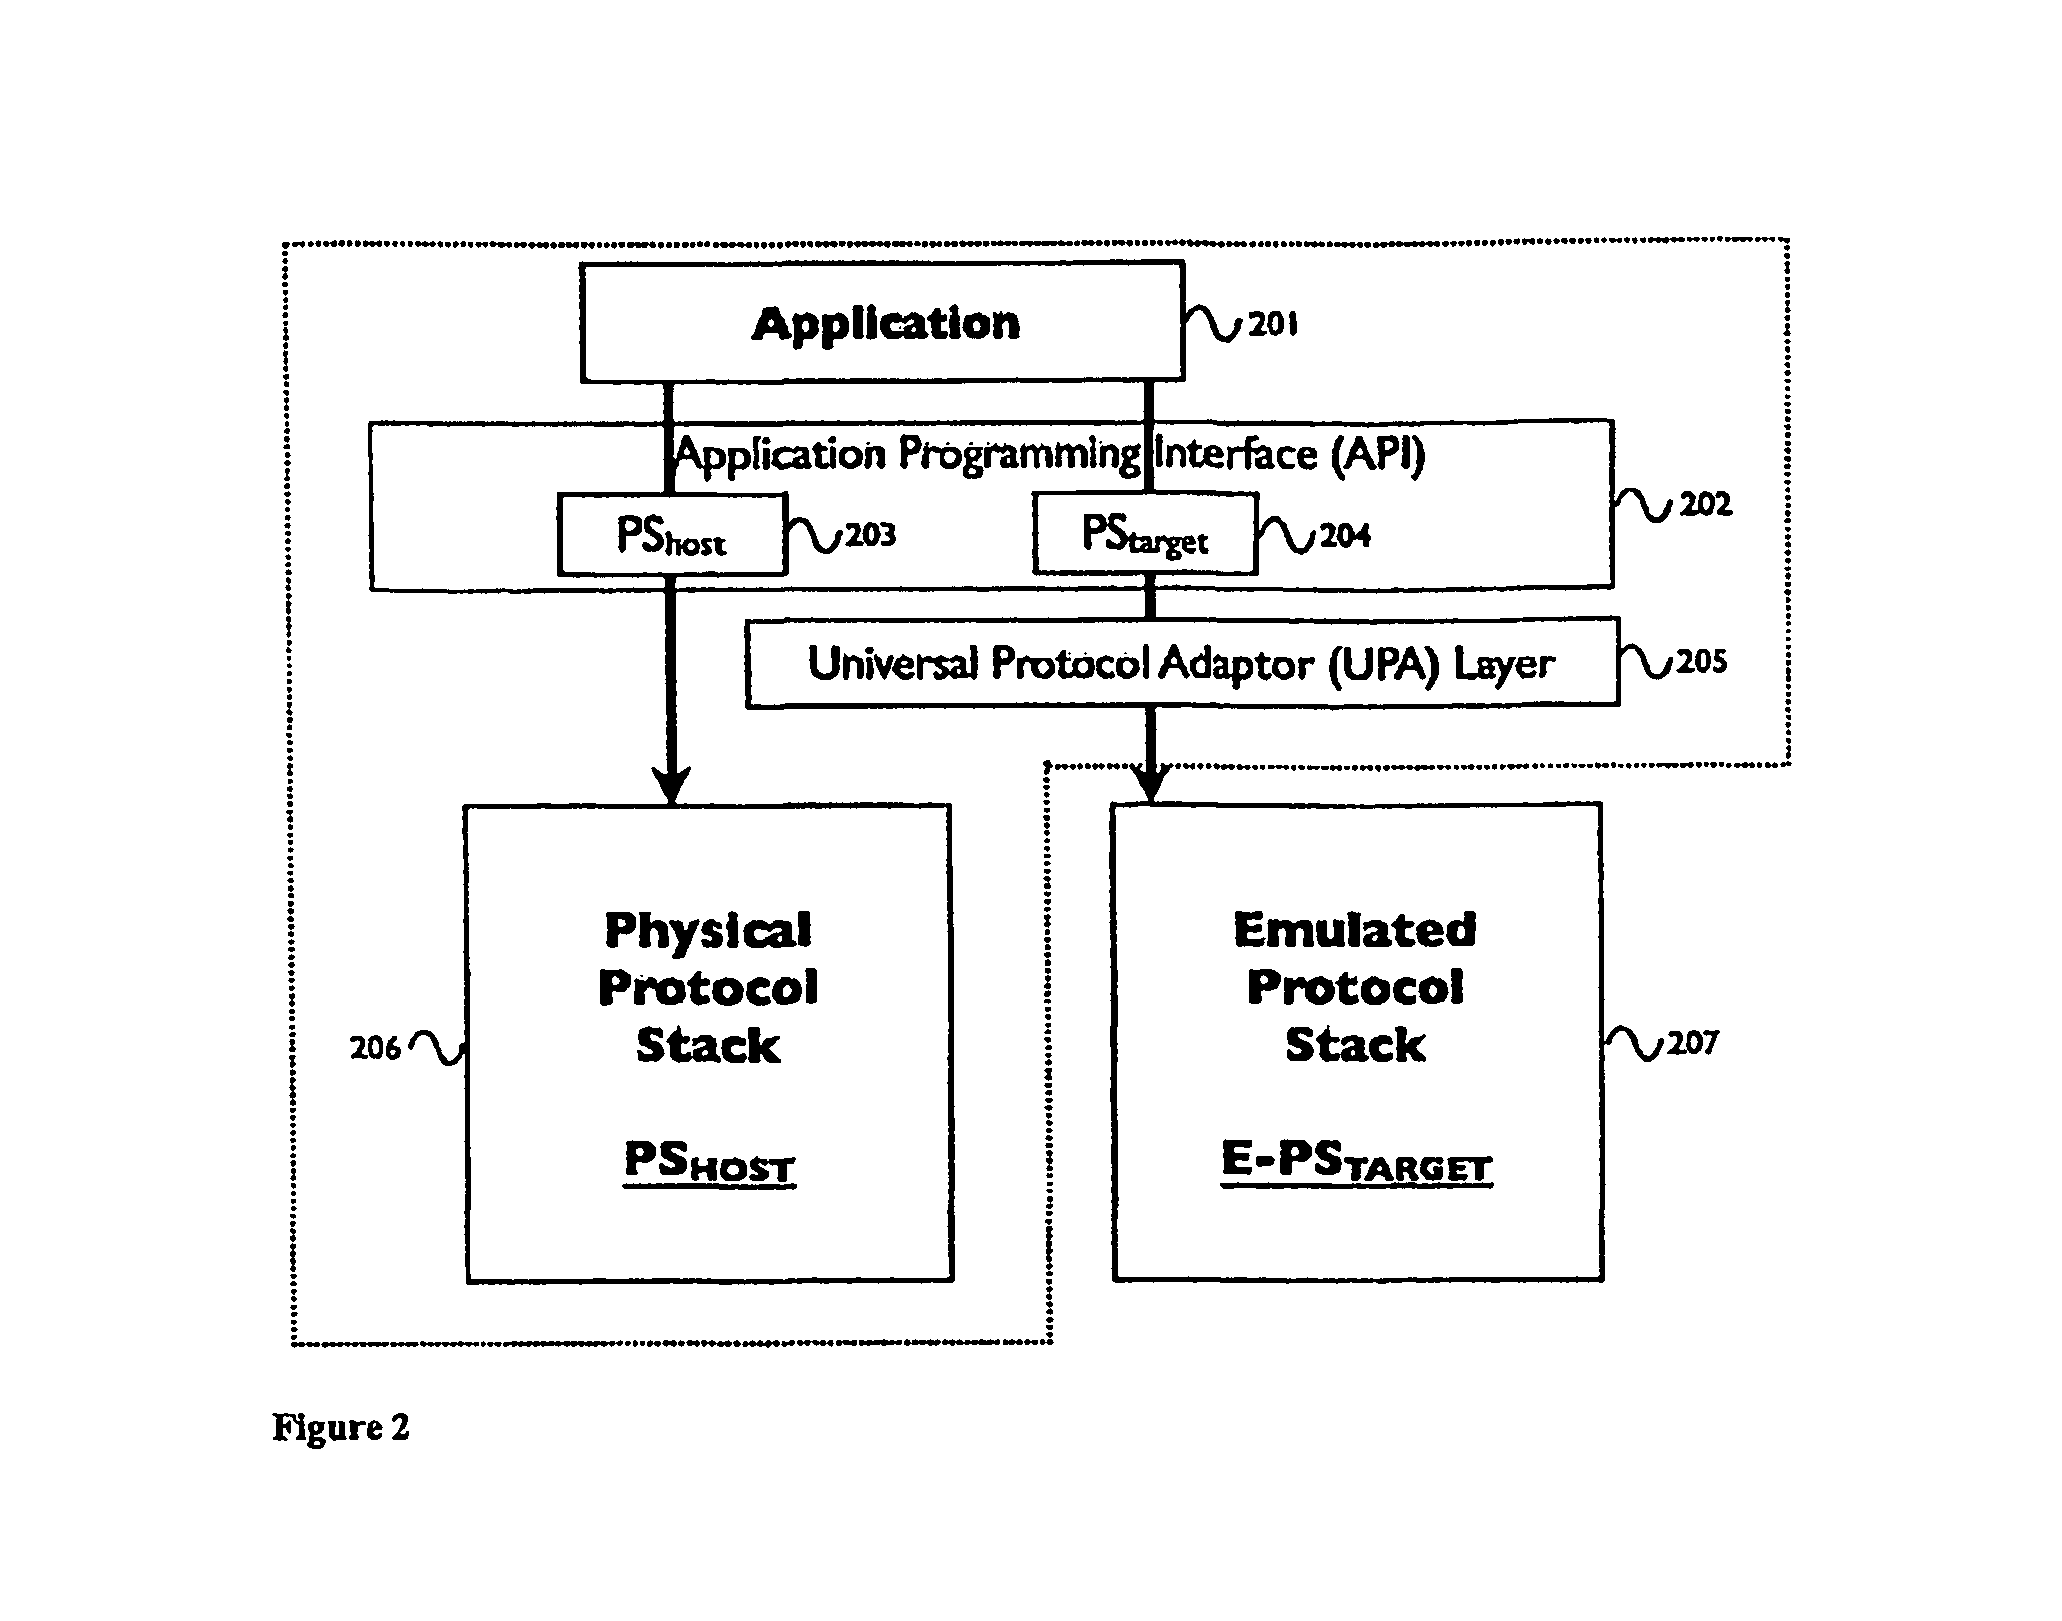 System and method for virtualization of networking system software via emulation